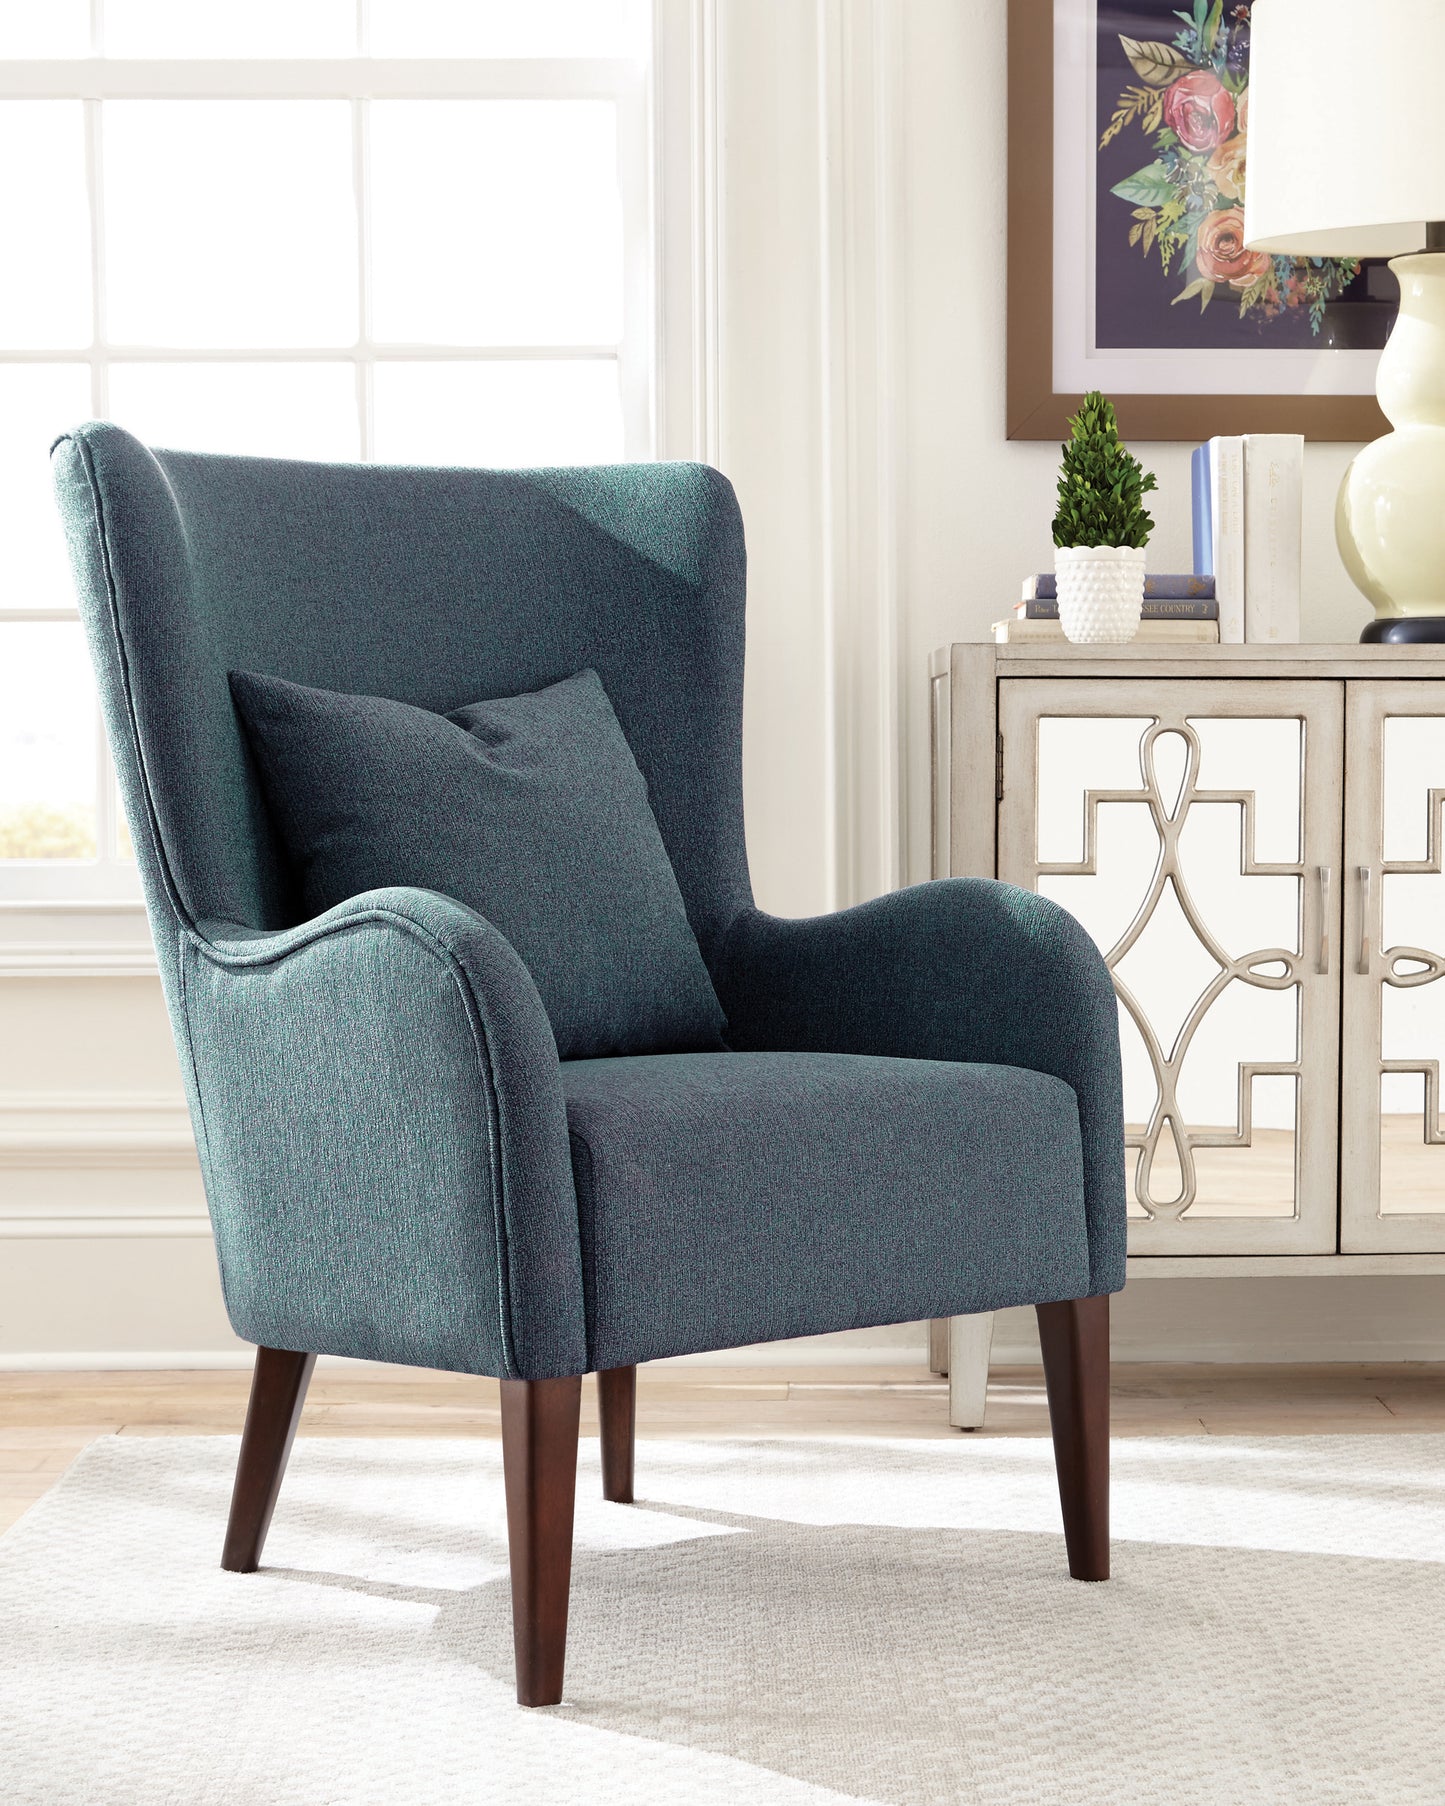 Curved Arm Upholstered Accent Chair Blue